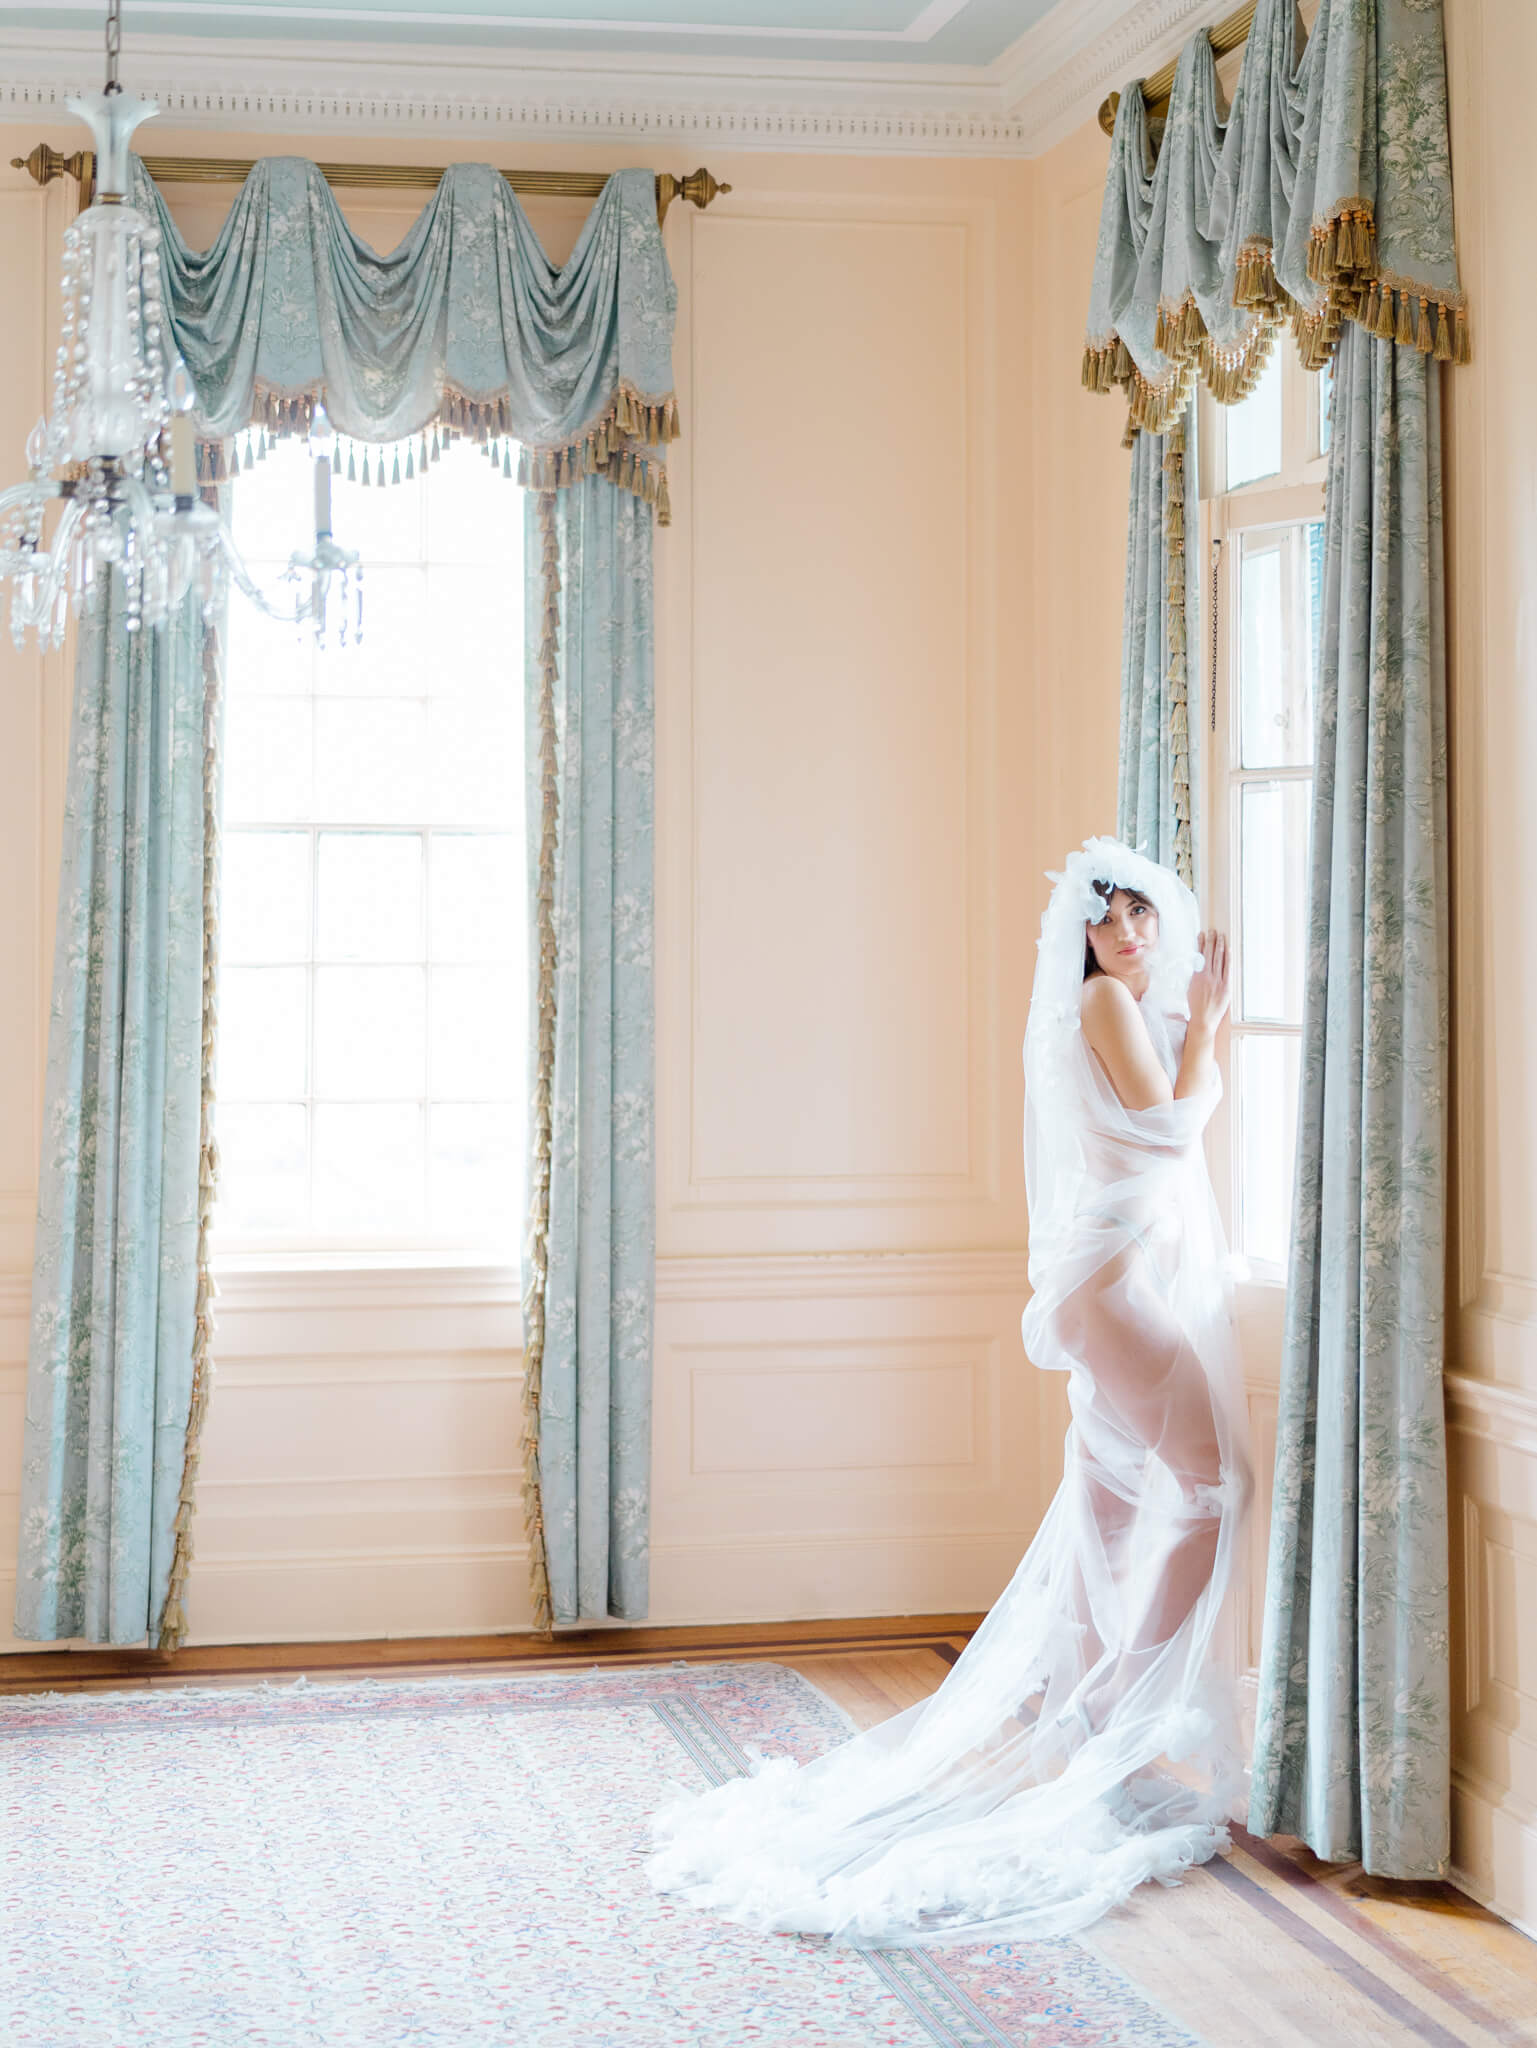 A bridal boudoir image of a bride covered in only her veil standing by the window in Lowndes Grove's pink room.